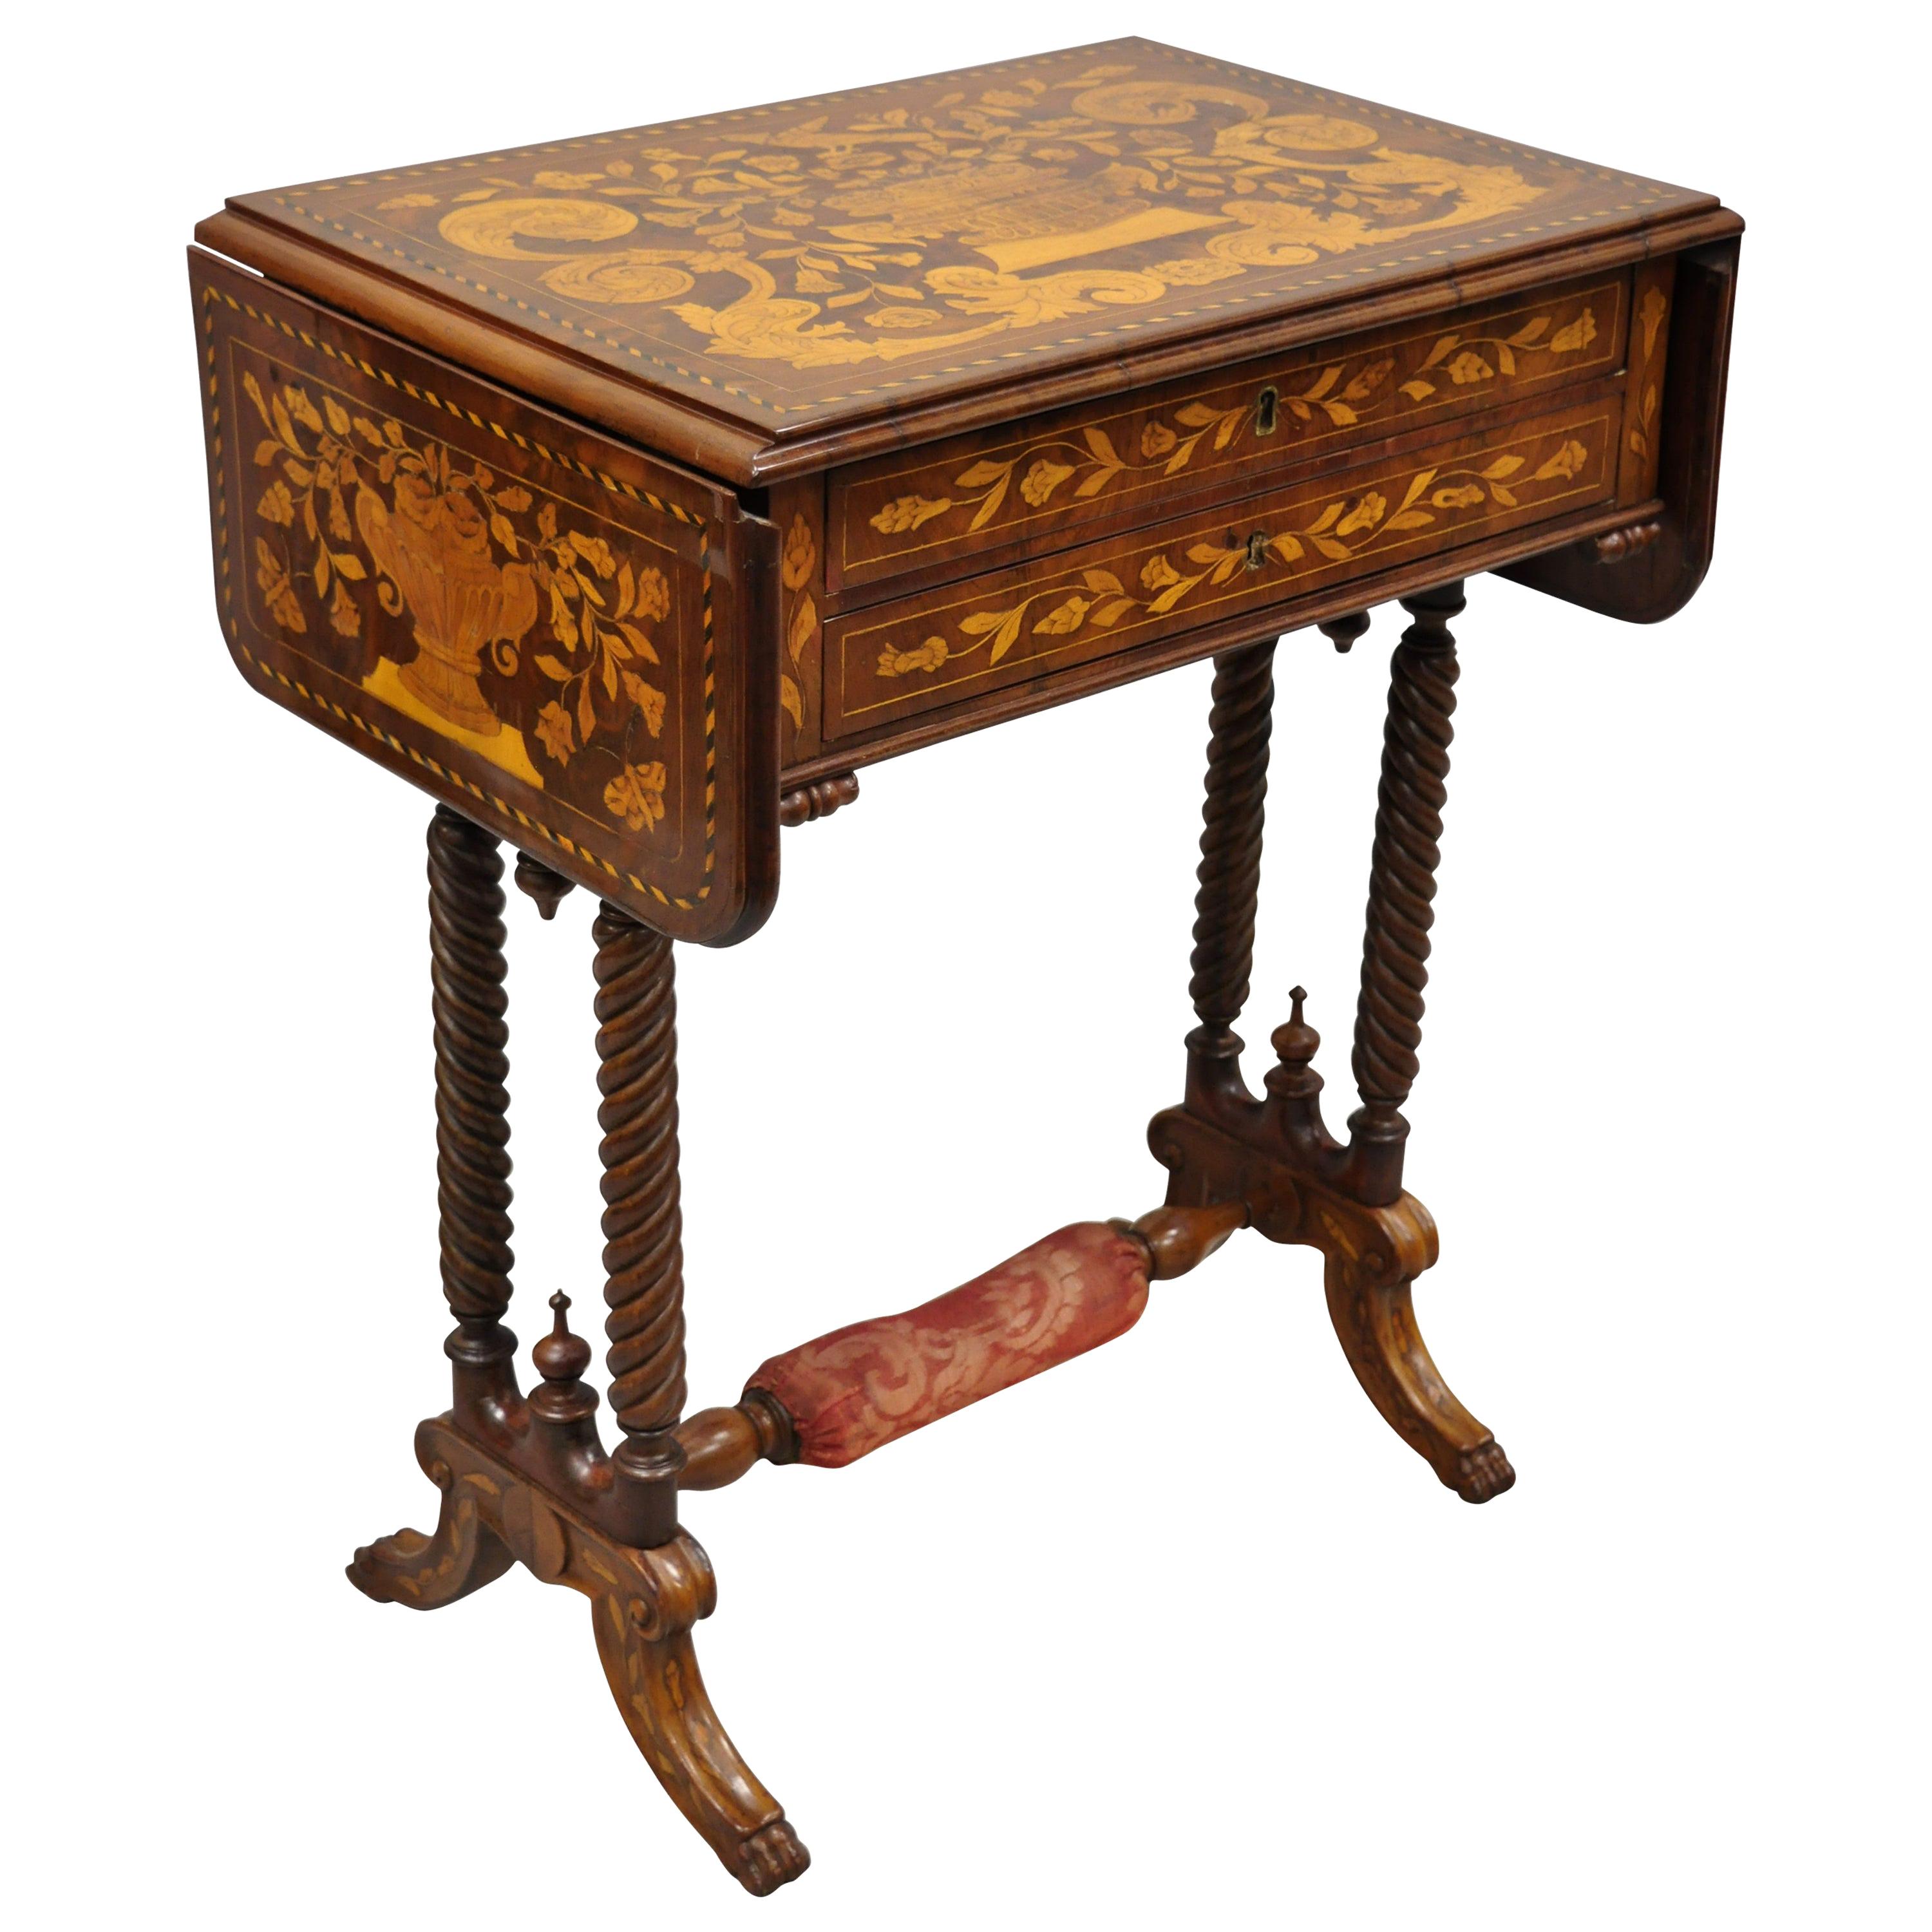 Dutch Marquetry Inlaid Regency Style Drop-Leaf Sewing Stand Work Table For Sale